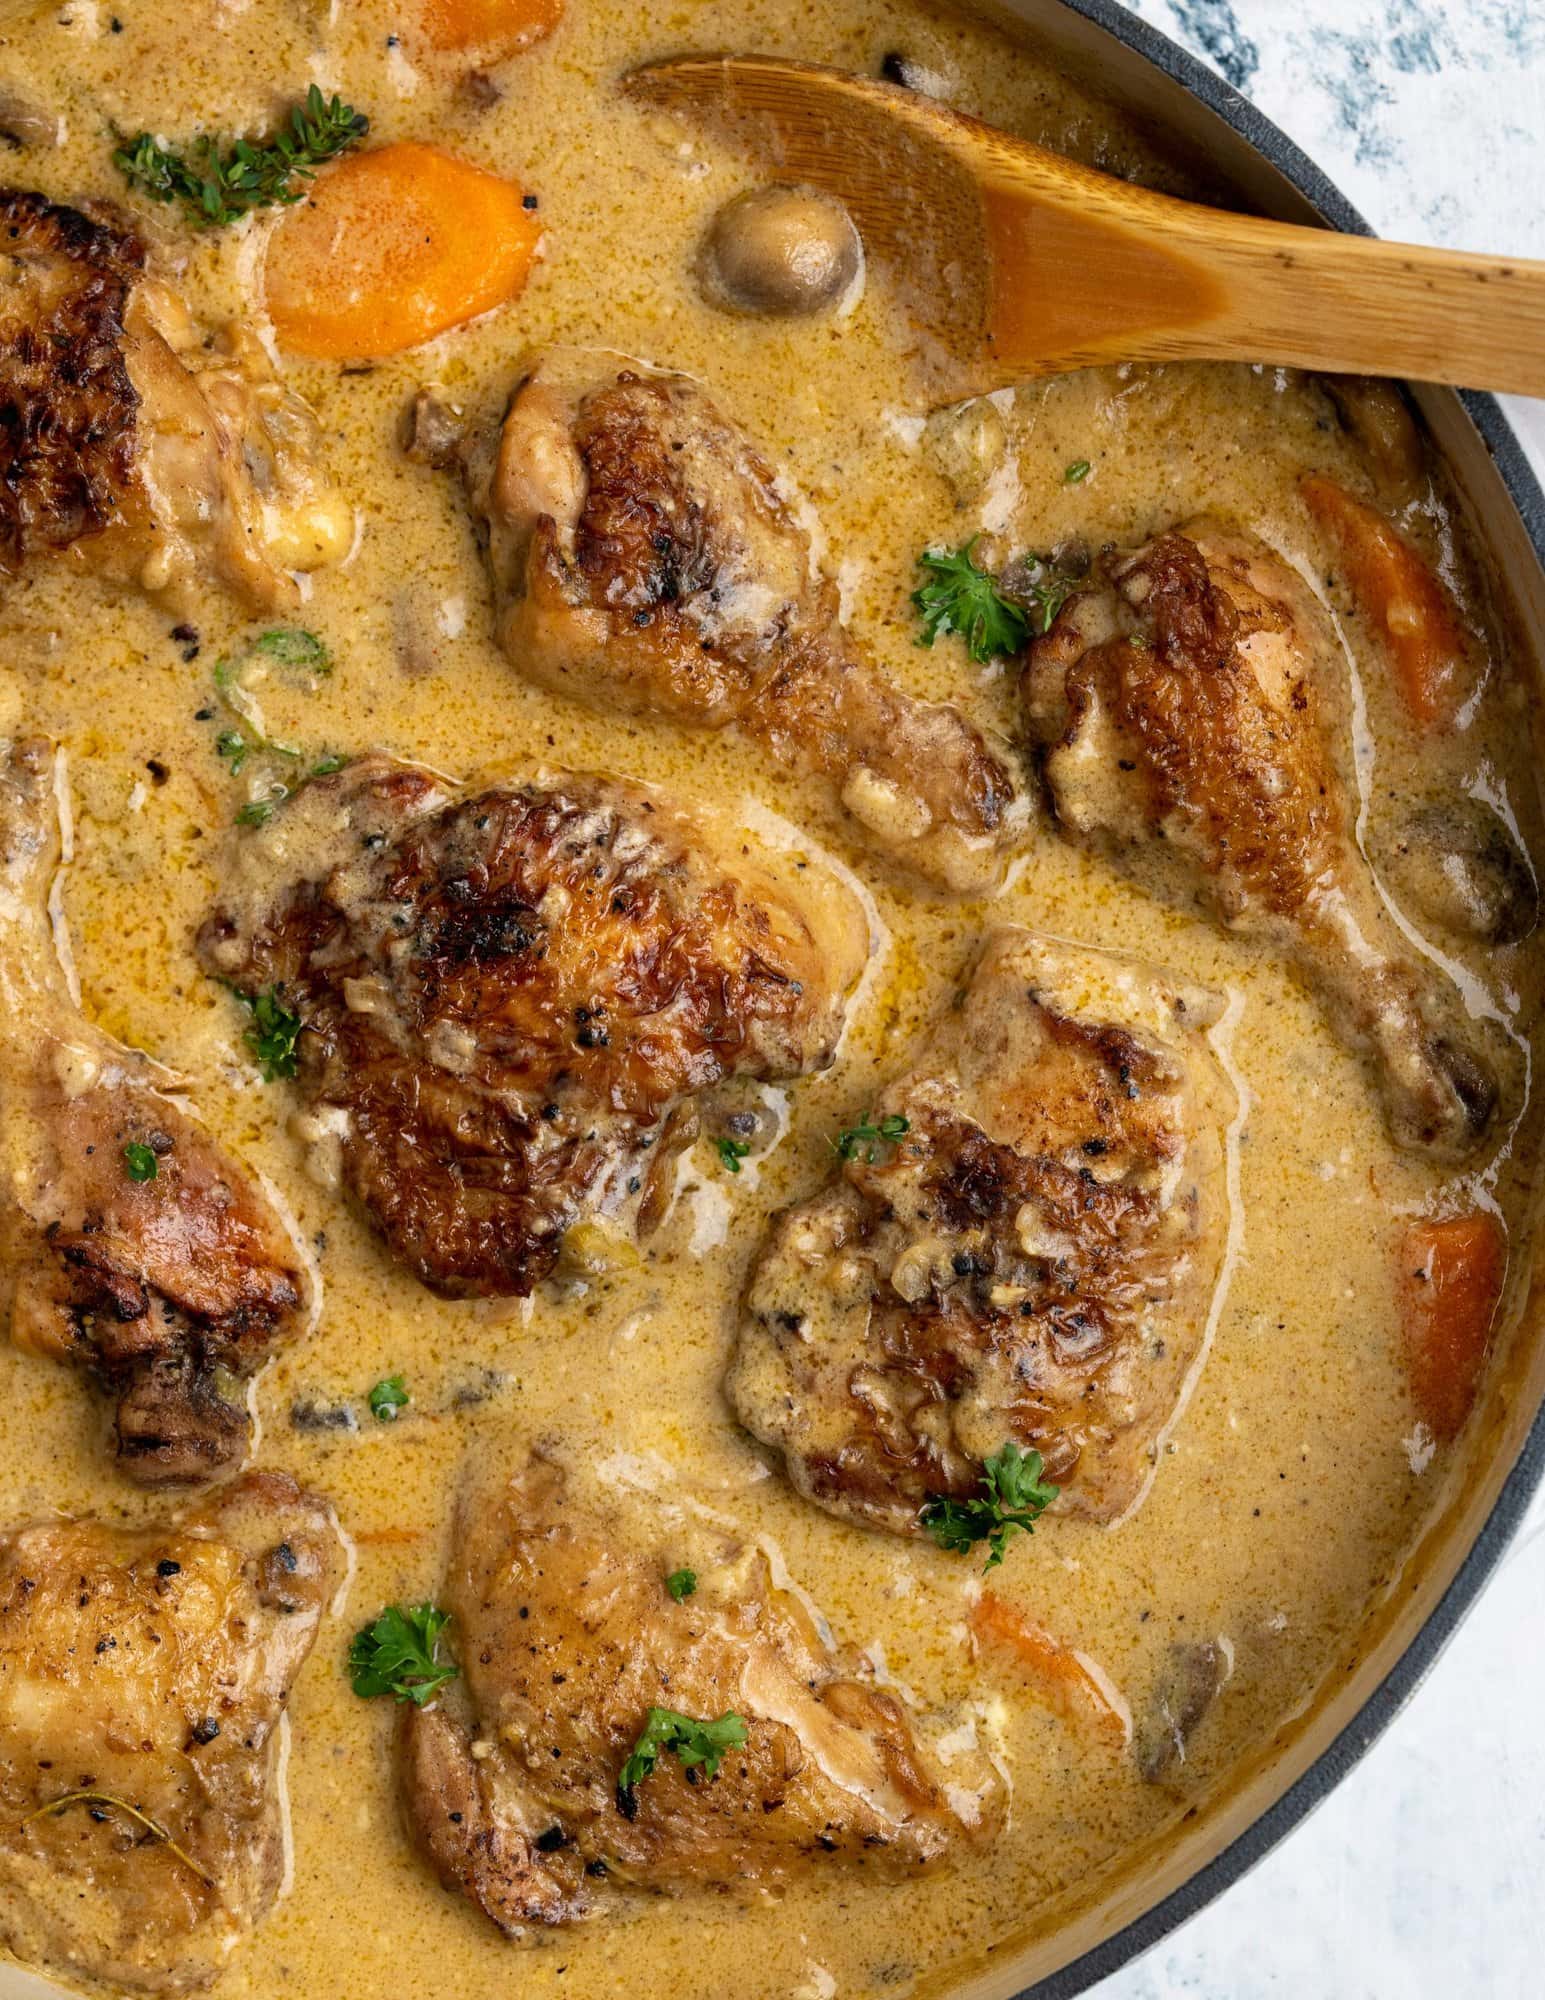 Seared and browned chicken pieces lying in a delicious and creamy sauce with flavors from mushroom and stock.